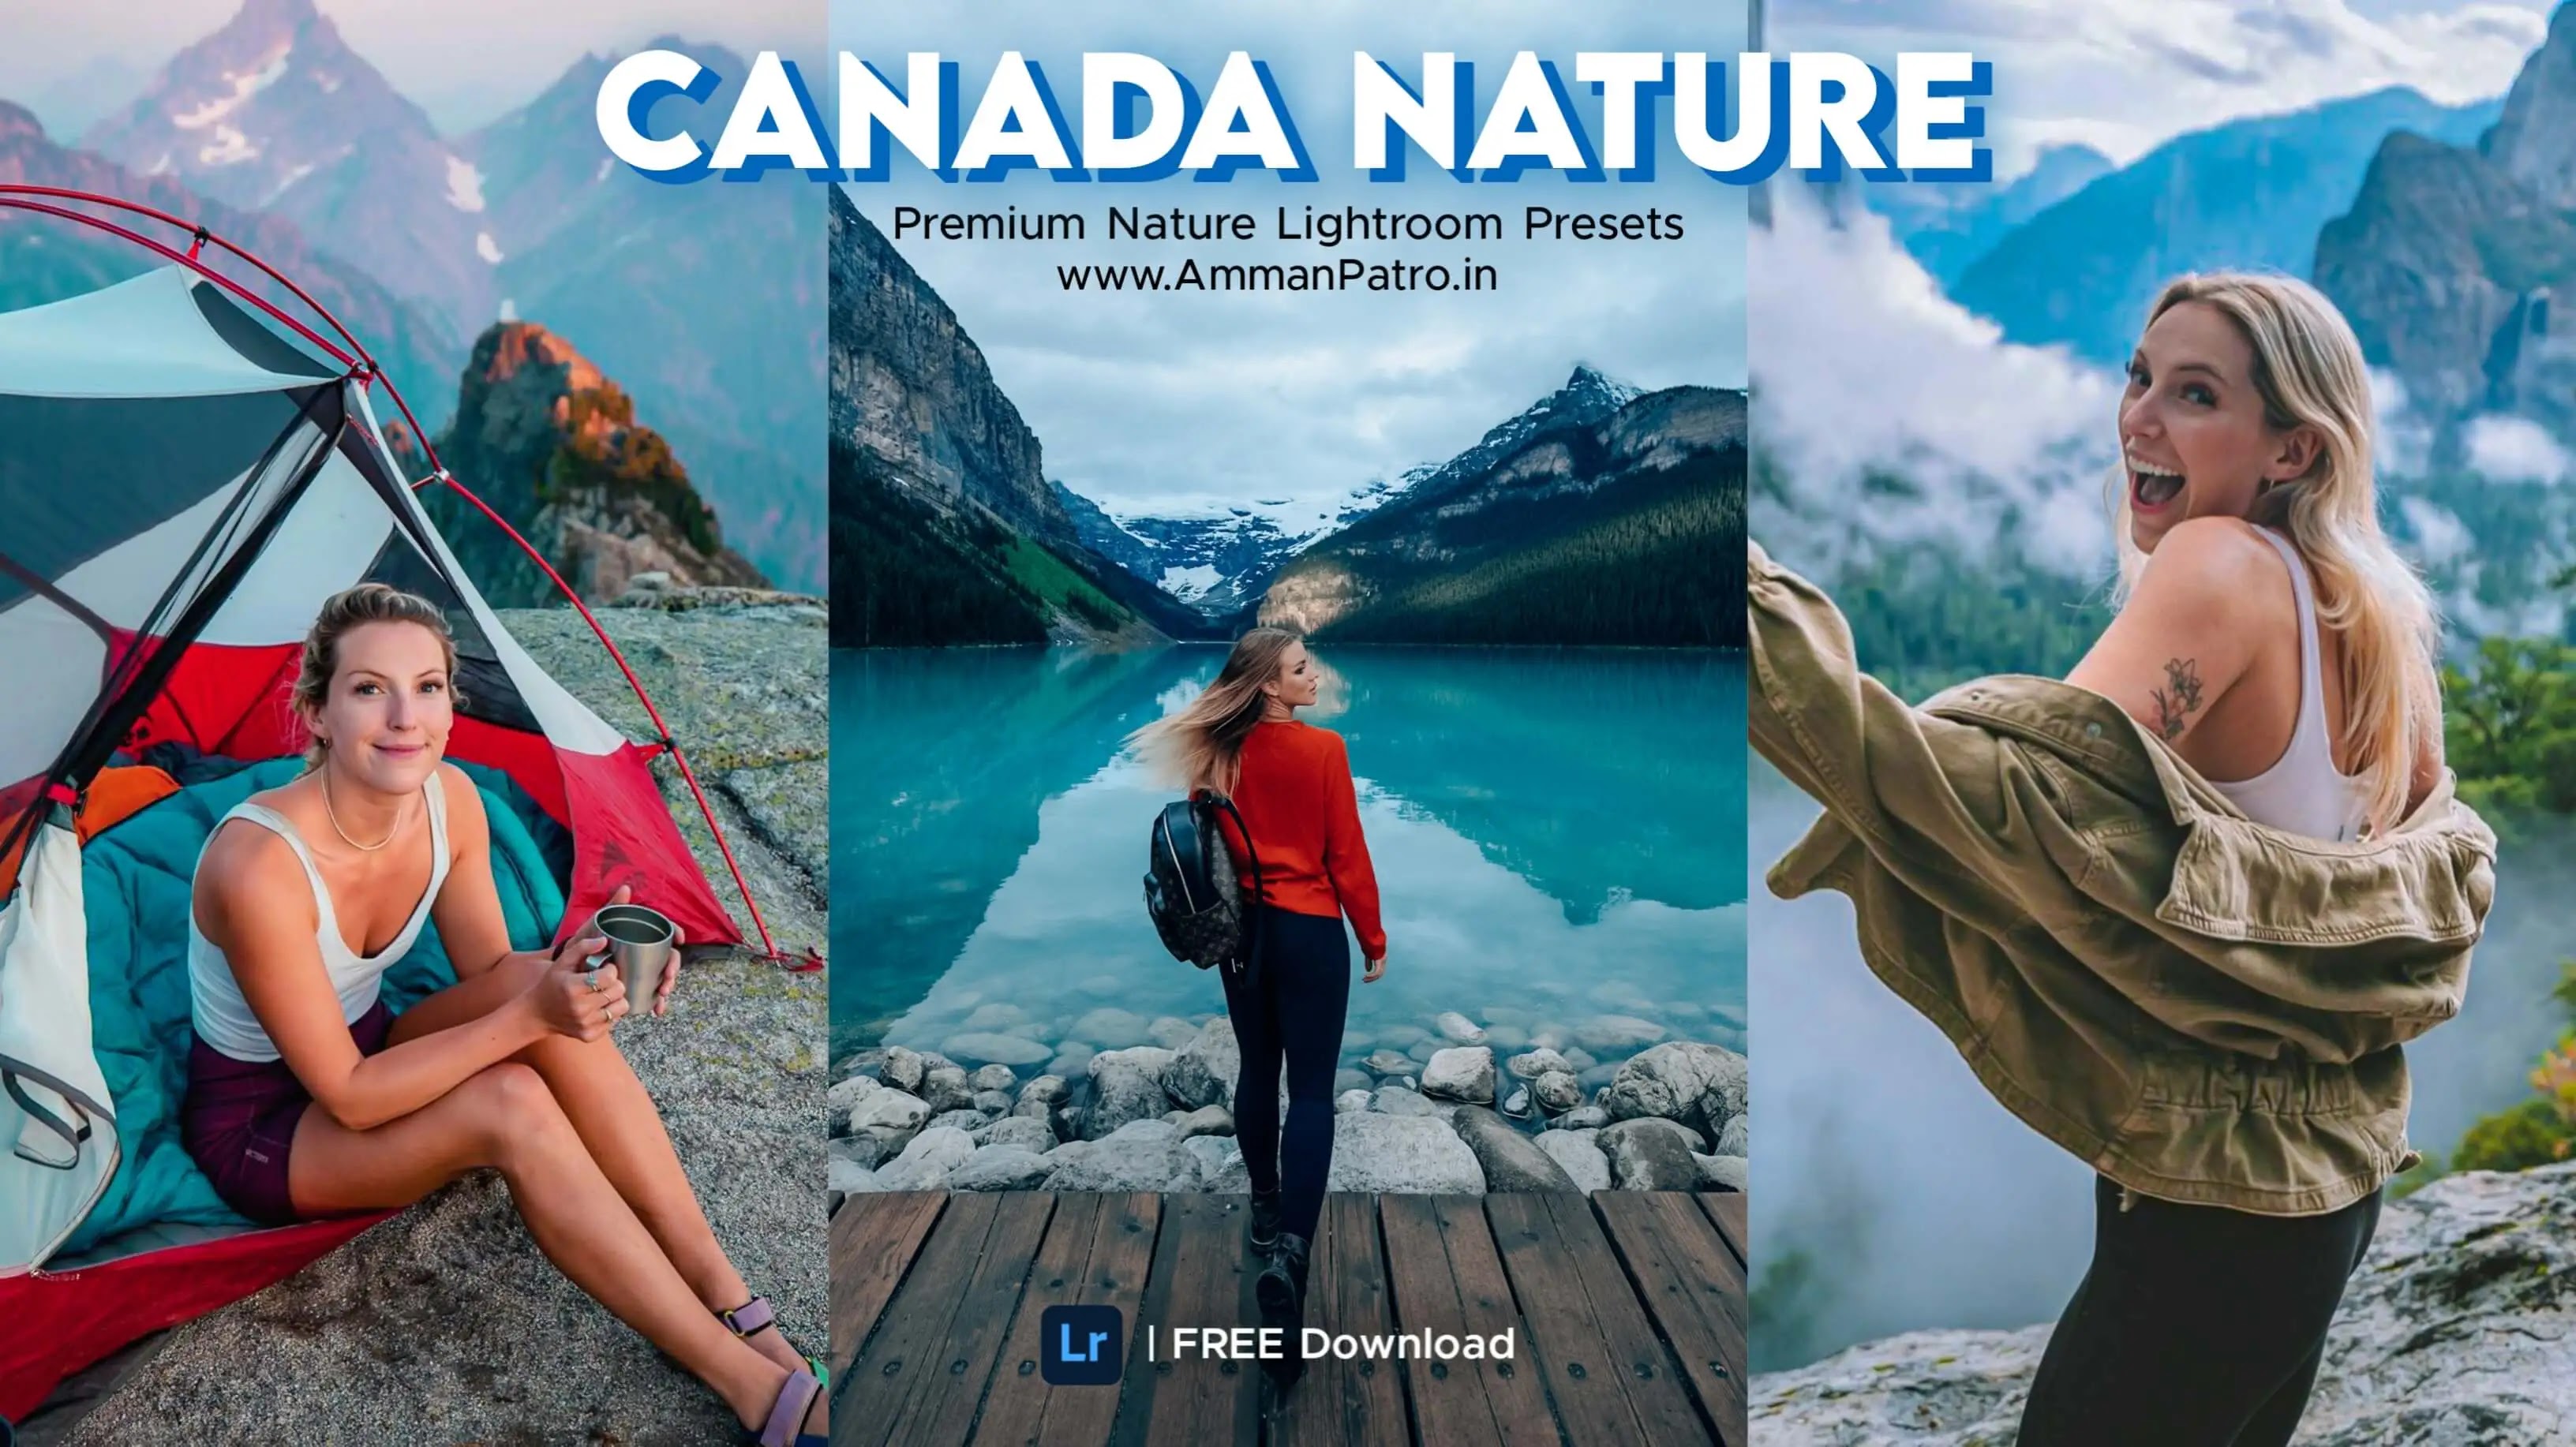 Canada Nature FREE Lightroom Presets DNG and XMP, Canada Nature Lightroom Presets Free Download, Lightroom Free Presets, Canada Lightroom Presets Free, Amman Lightroom Presets, Aman FREE Lightroom Filters, Amman Free Presets